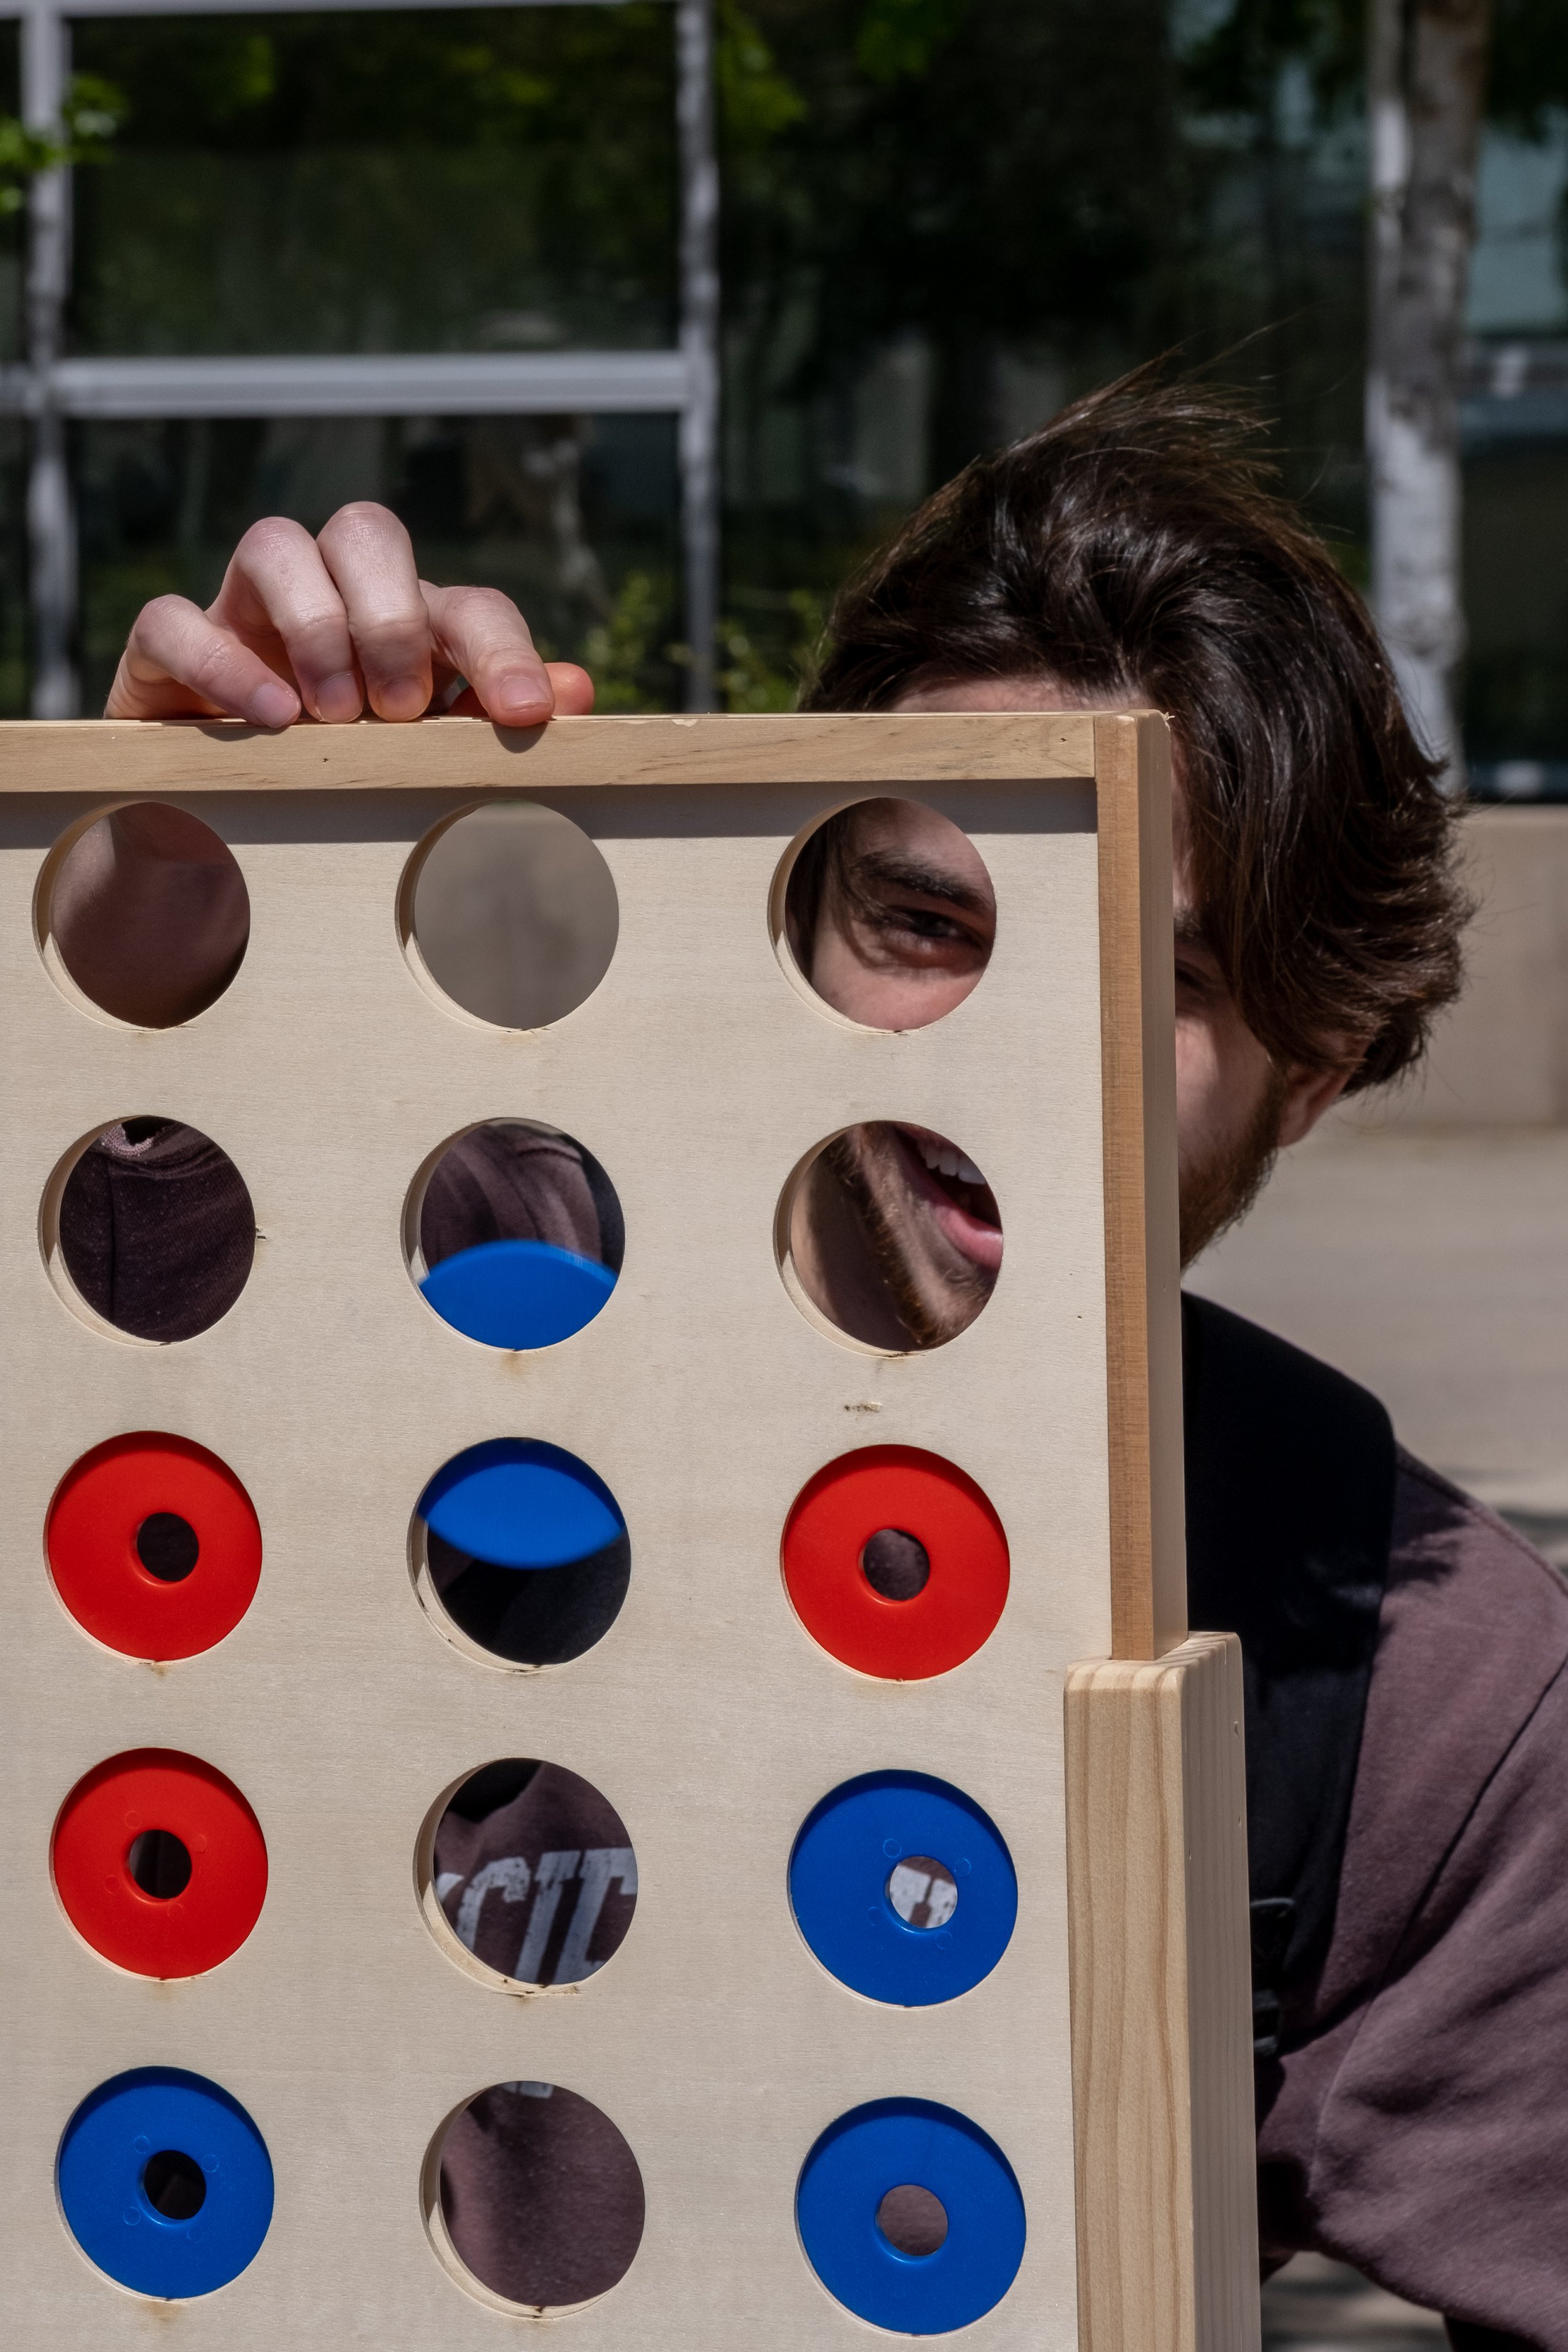  Sebastian Billot, nursing major, plays Connect Four on the Quad at Motivational Madness, an event for students to relax and take a break from studying on Tuesday, March 4th, 2023 at Santa Monica College, Santa Monica, Calif. (Akemi Rico | The Corsai